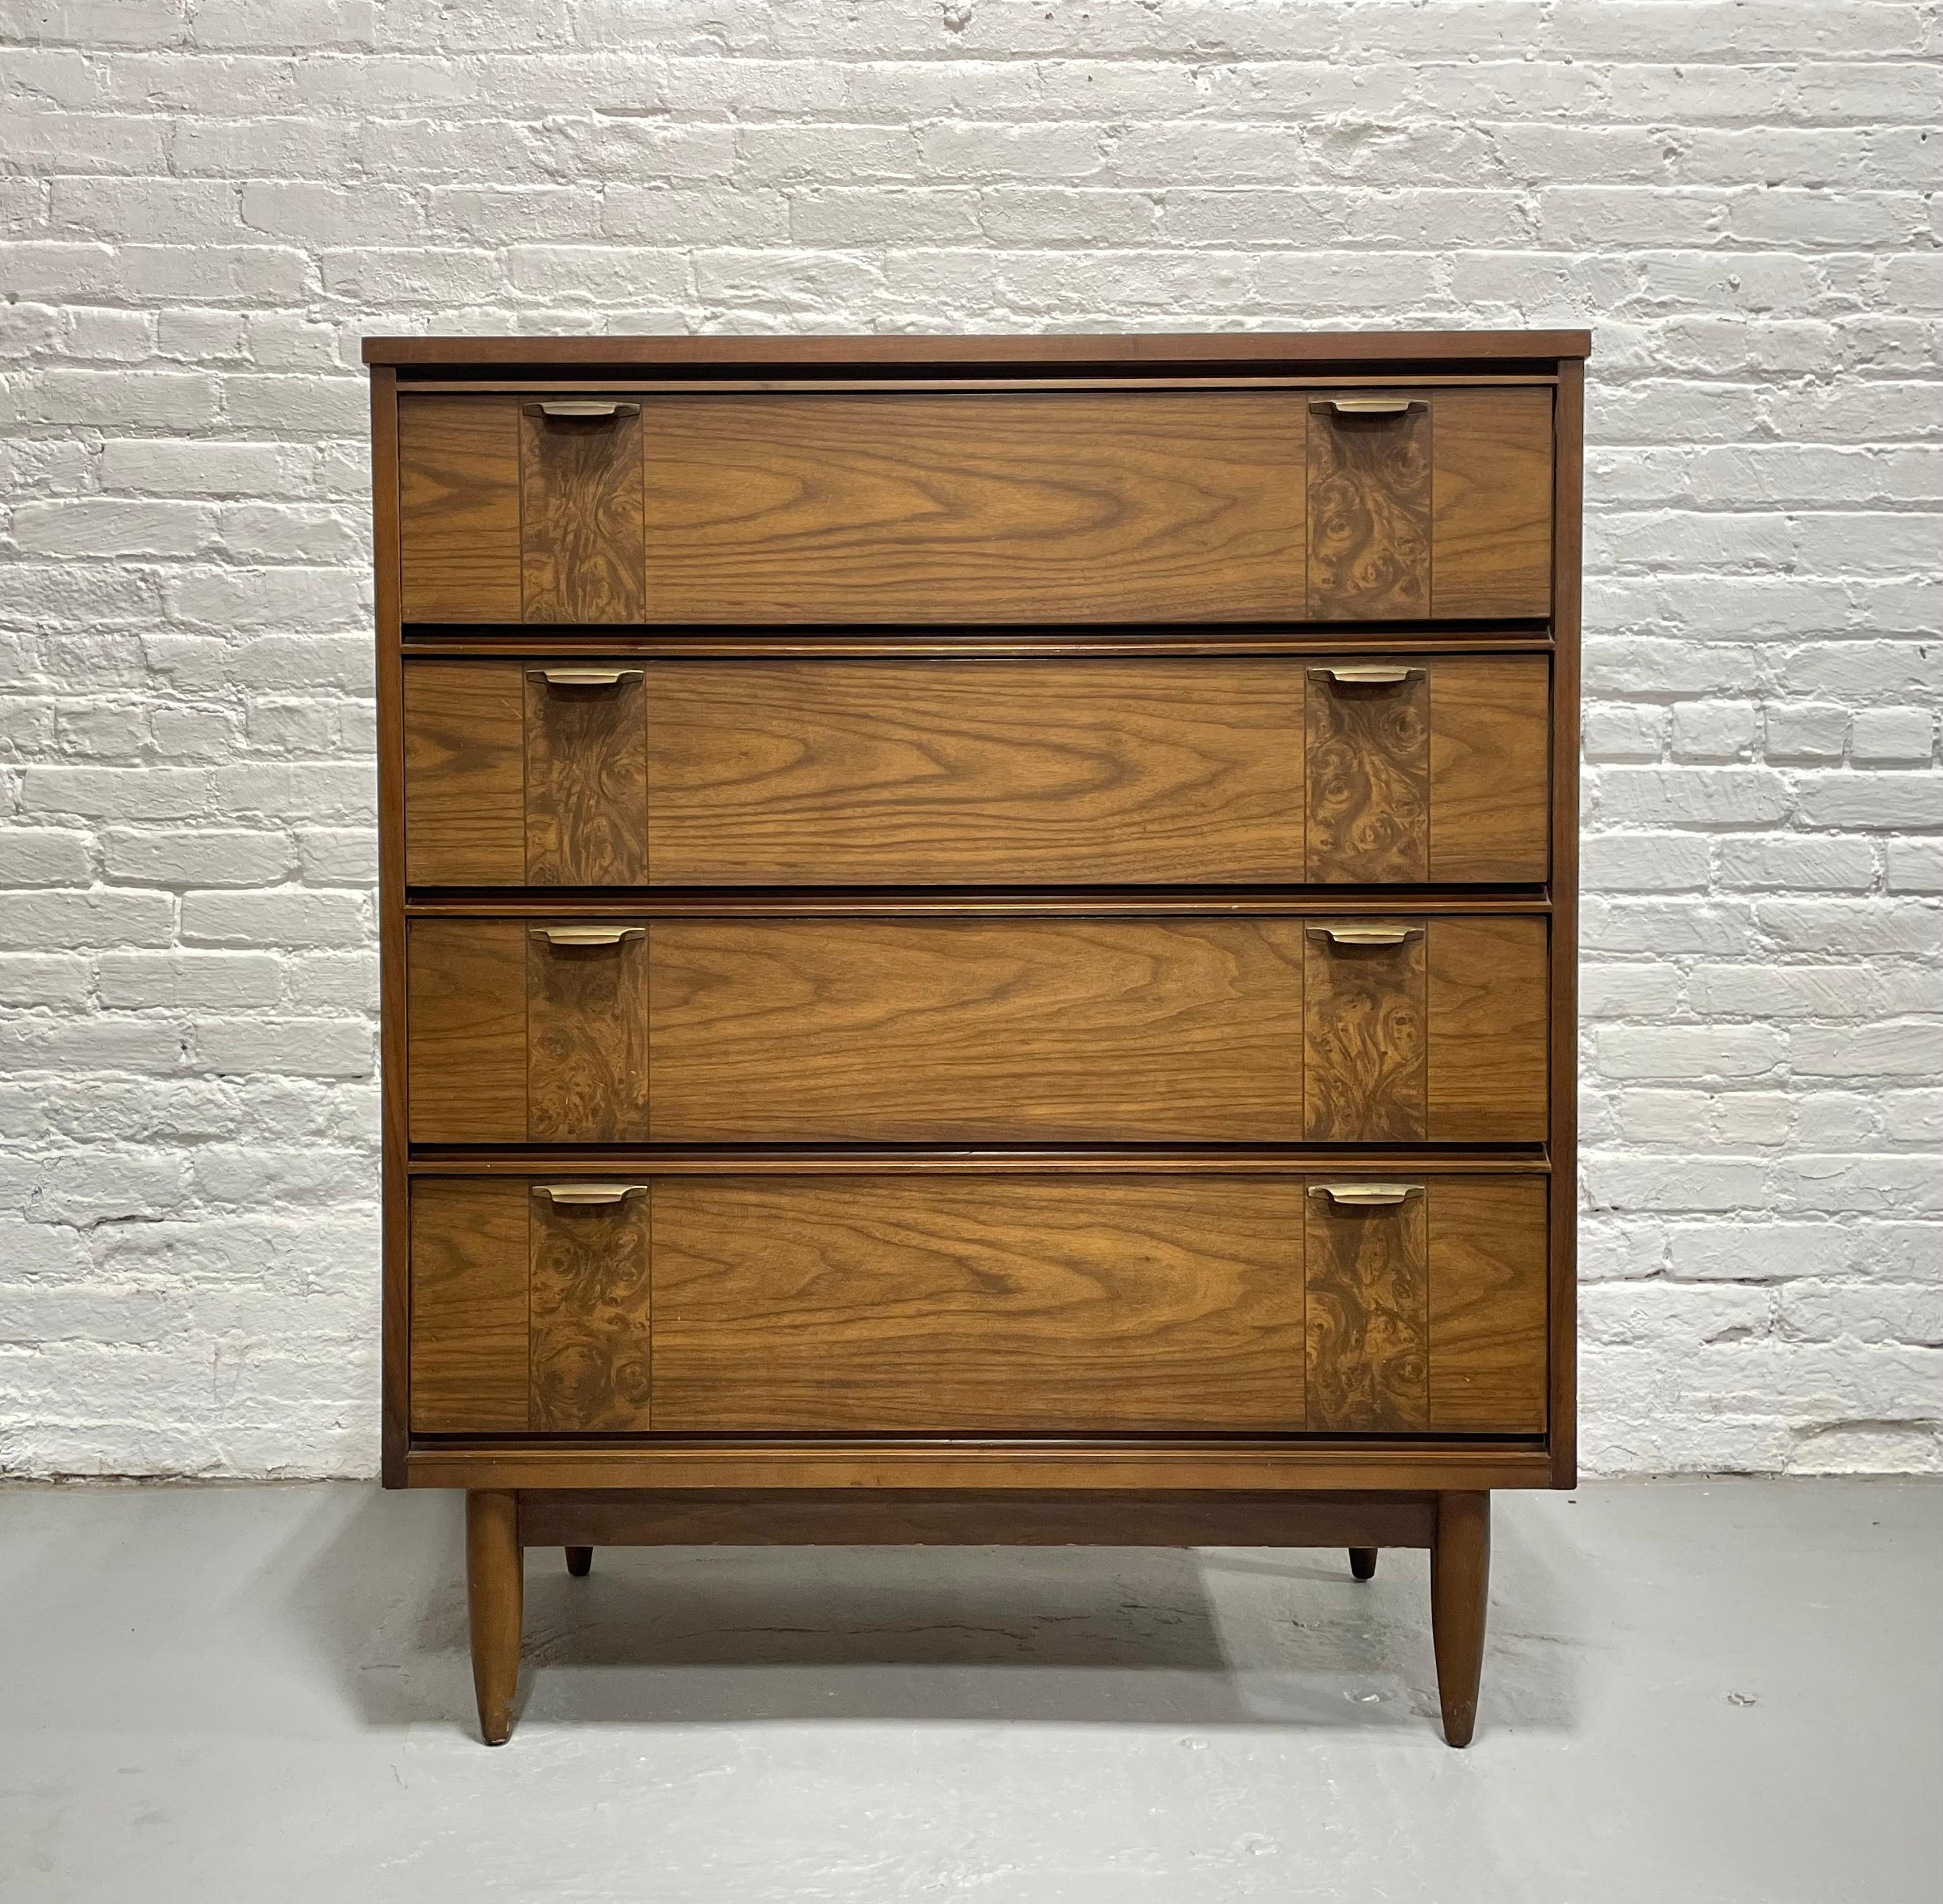 Mid Century Modern Walnut Dresser / Highboy, c. 1960's. This solid dresser offers a ton of storage space over four deep and spacious drawers.  Lovely woodgrains with decorative detailing along each drawer.  Nice vintage condition with some light